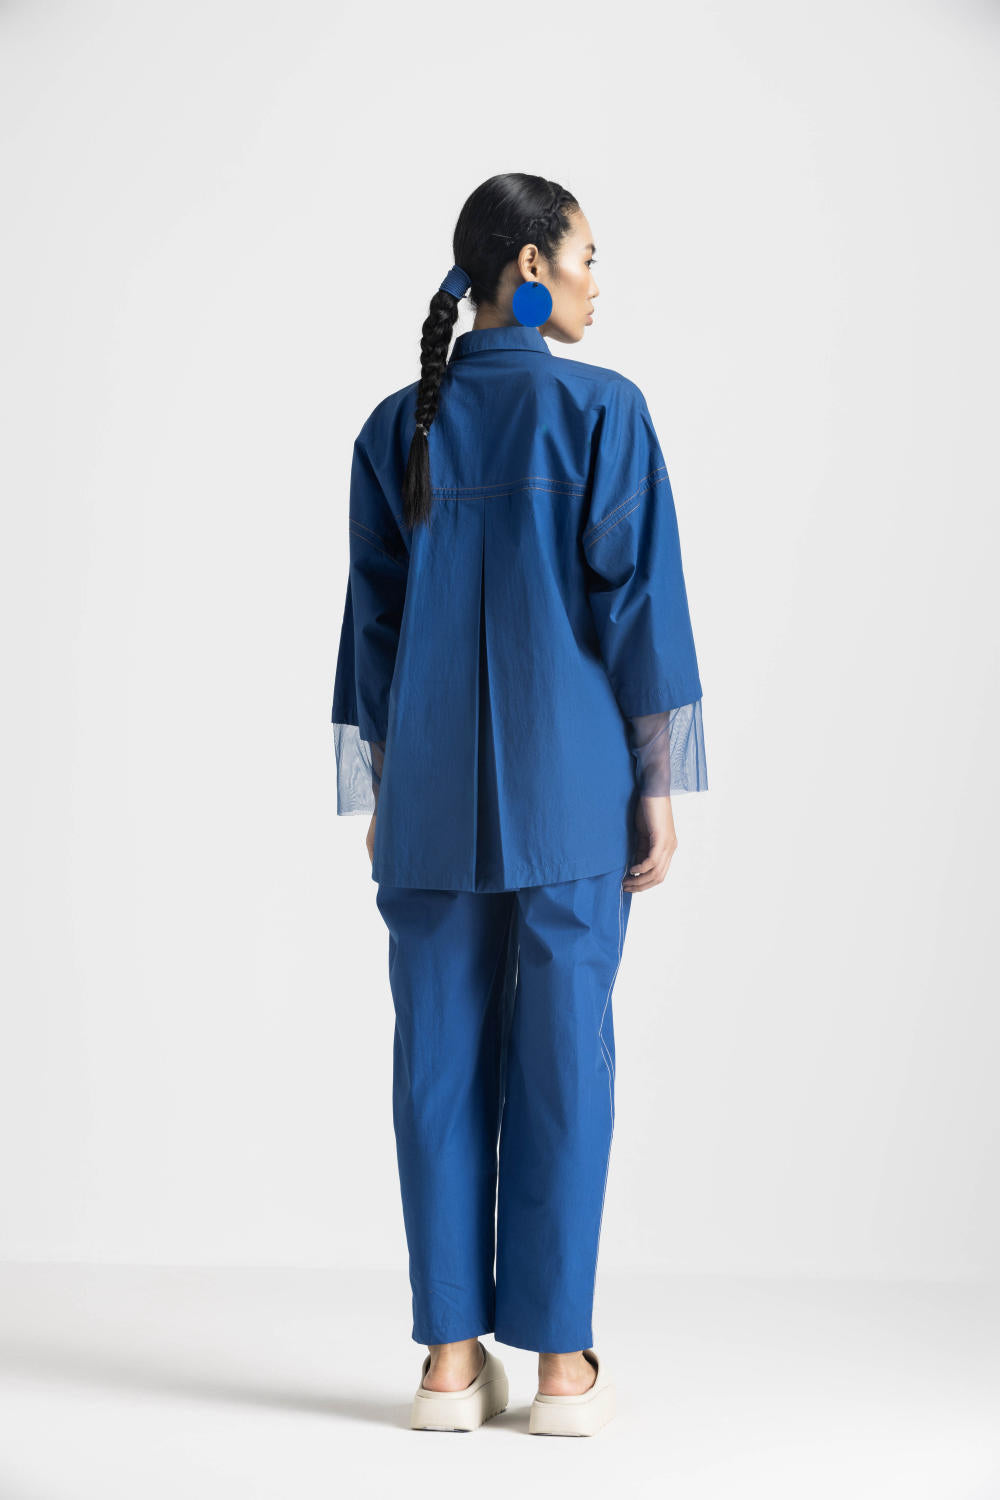 CONTRAST DETAIL SHIRT CO ORD - ELECTRIC BLUE